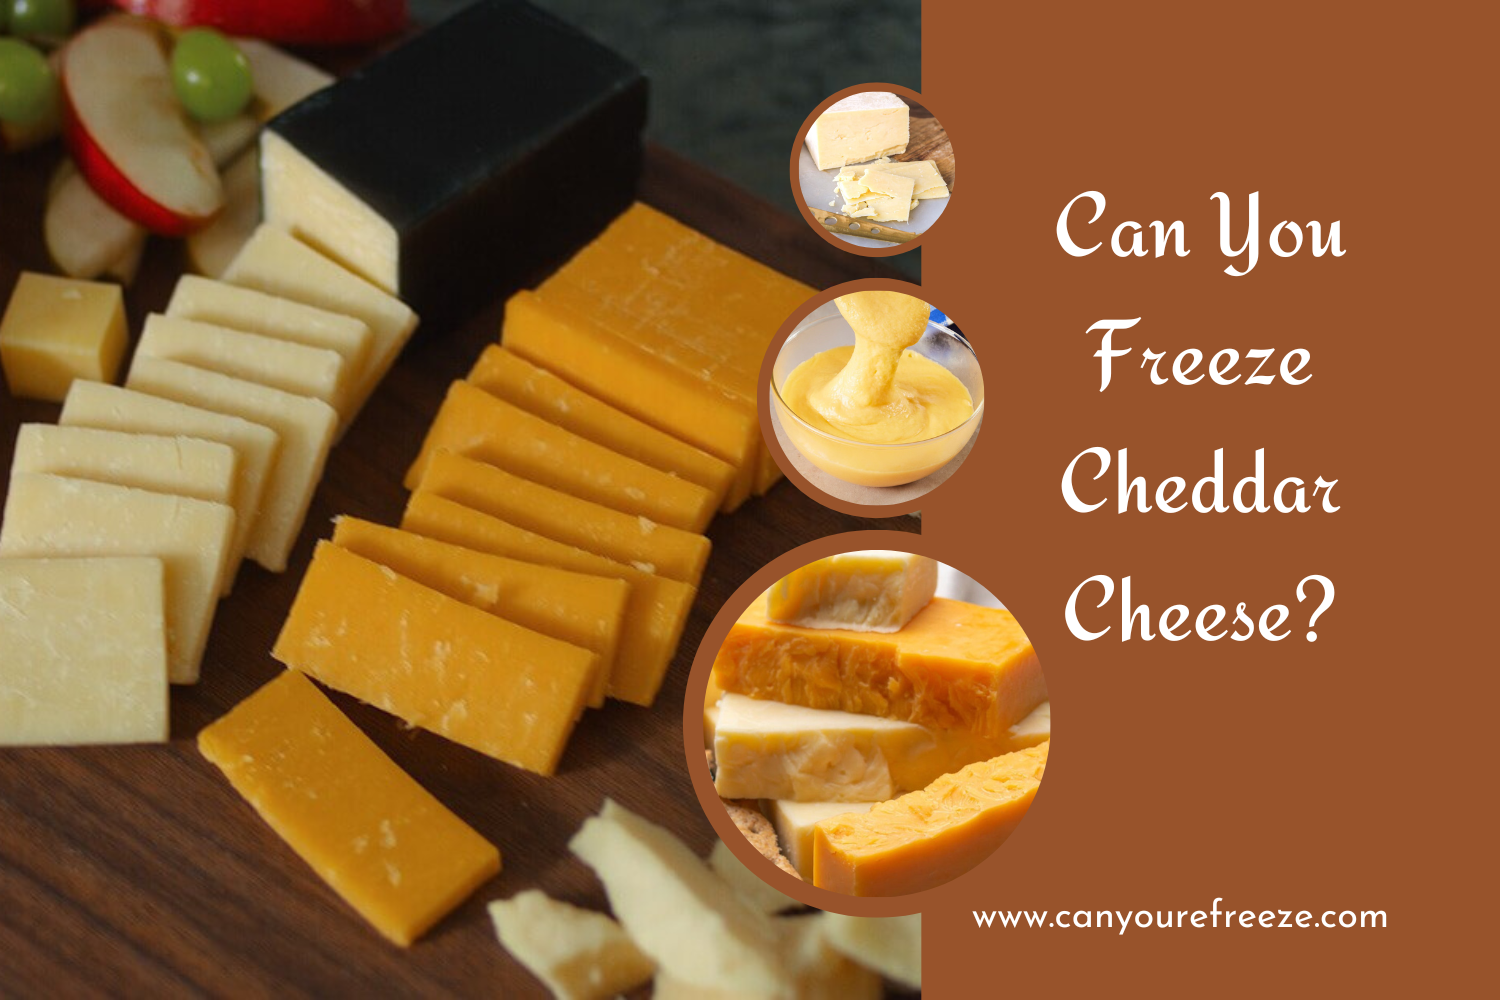 Can You Freeze Cheddar Cheese